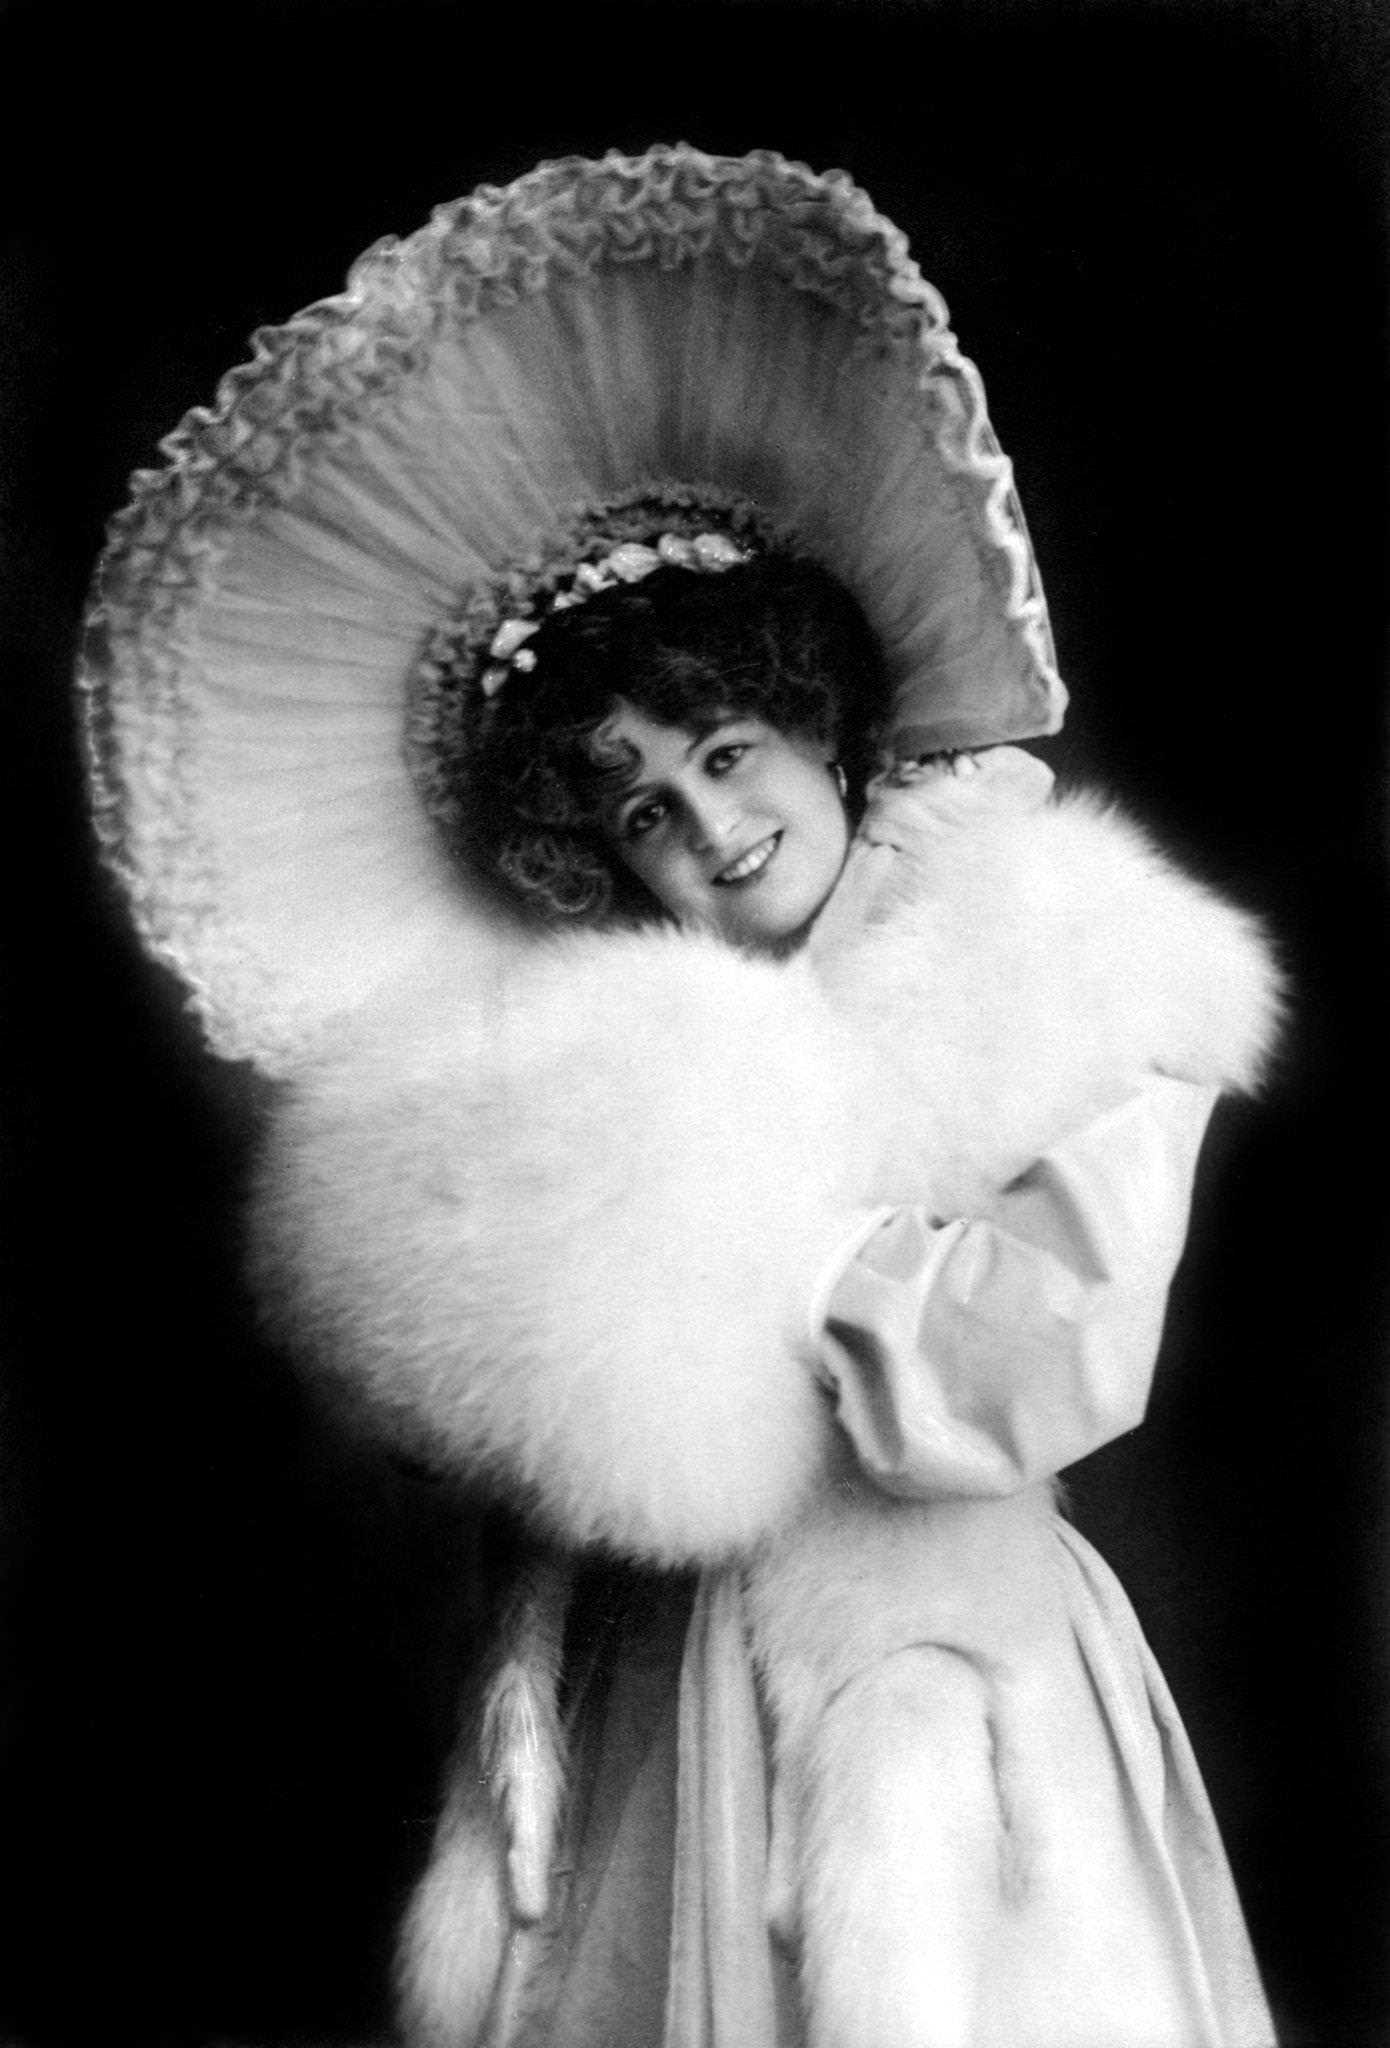 Marie Studholme poses with confidence in her stylish hat